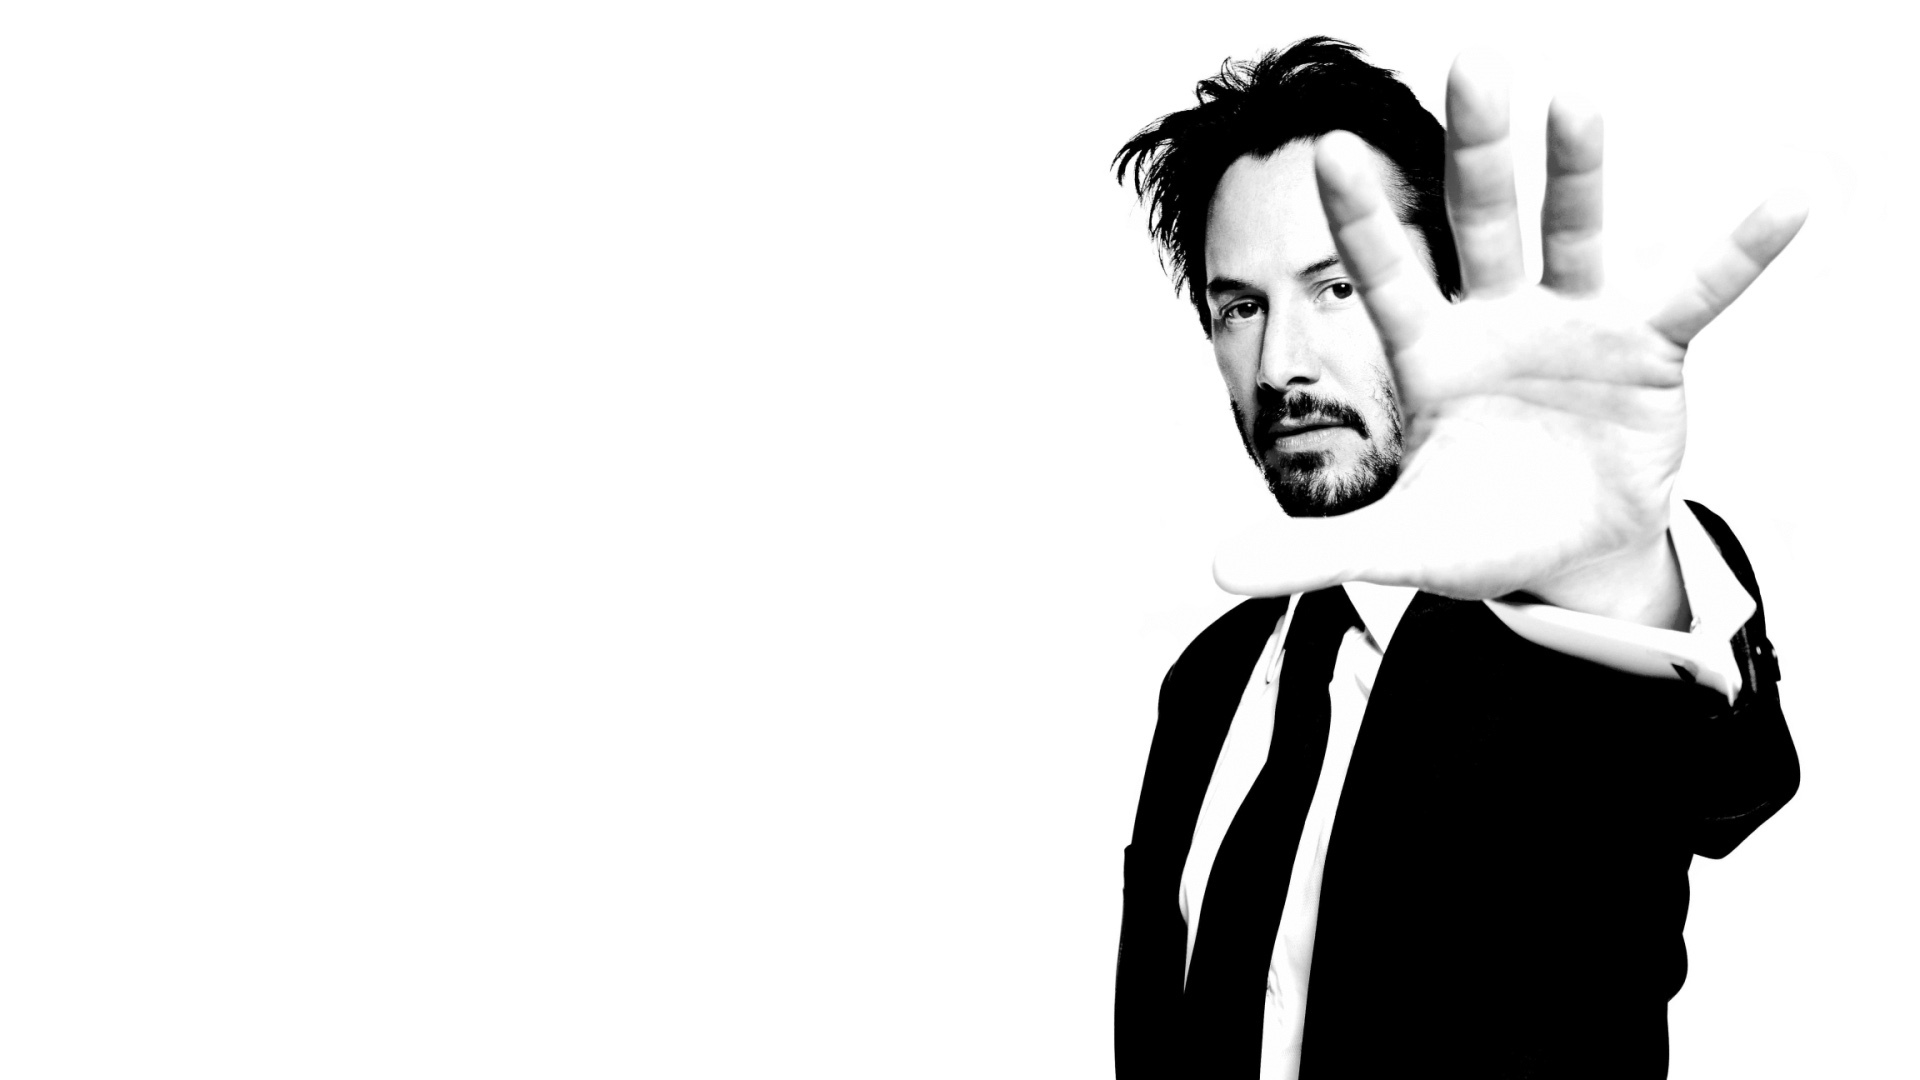 Keanu Reeves Black and White for 1920 x 1080 HDTV 1080p resolution